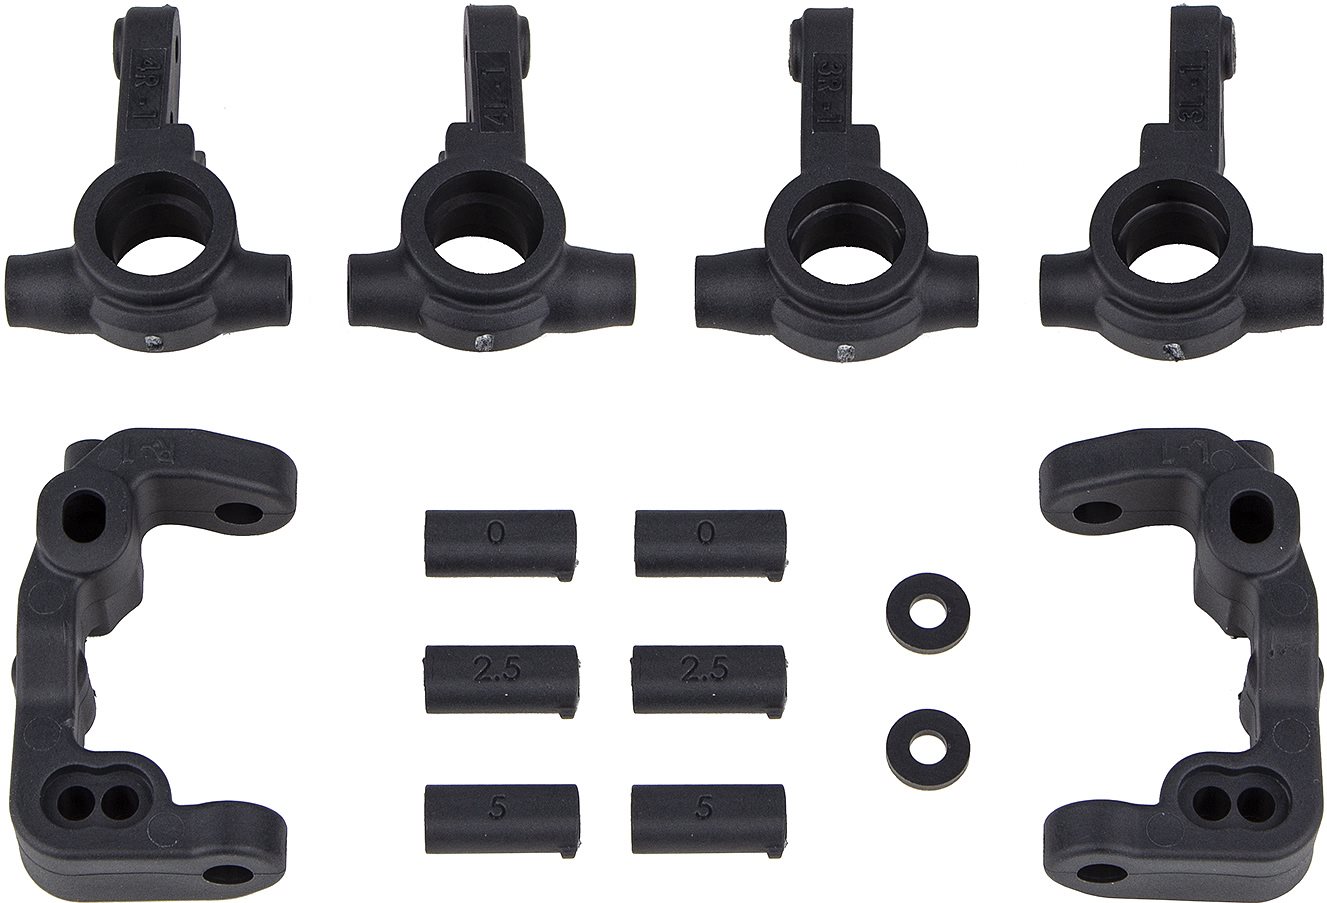 Associated Rc10b6.4 -1Mm Scrub Caster And Steering Blocks, Carbon